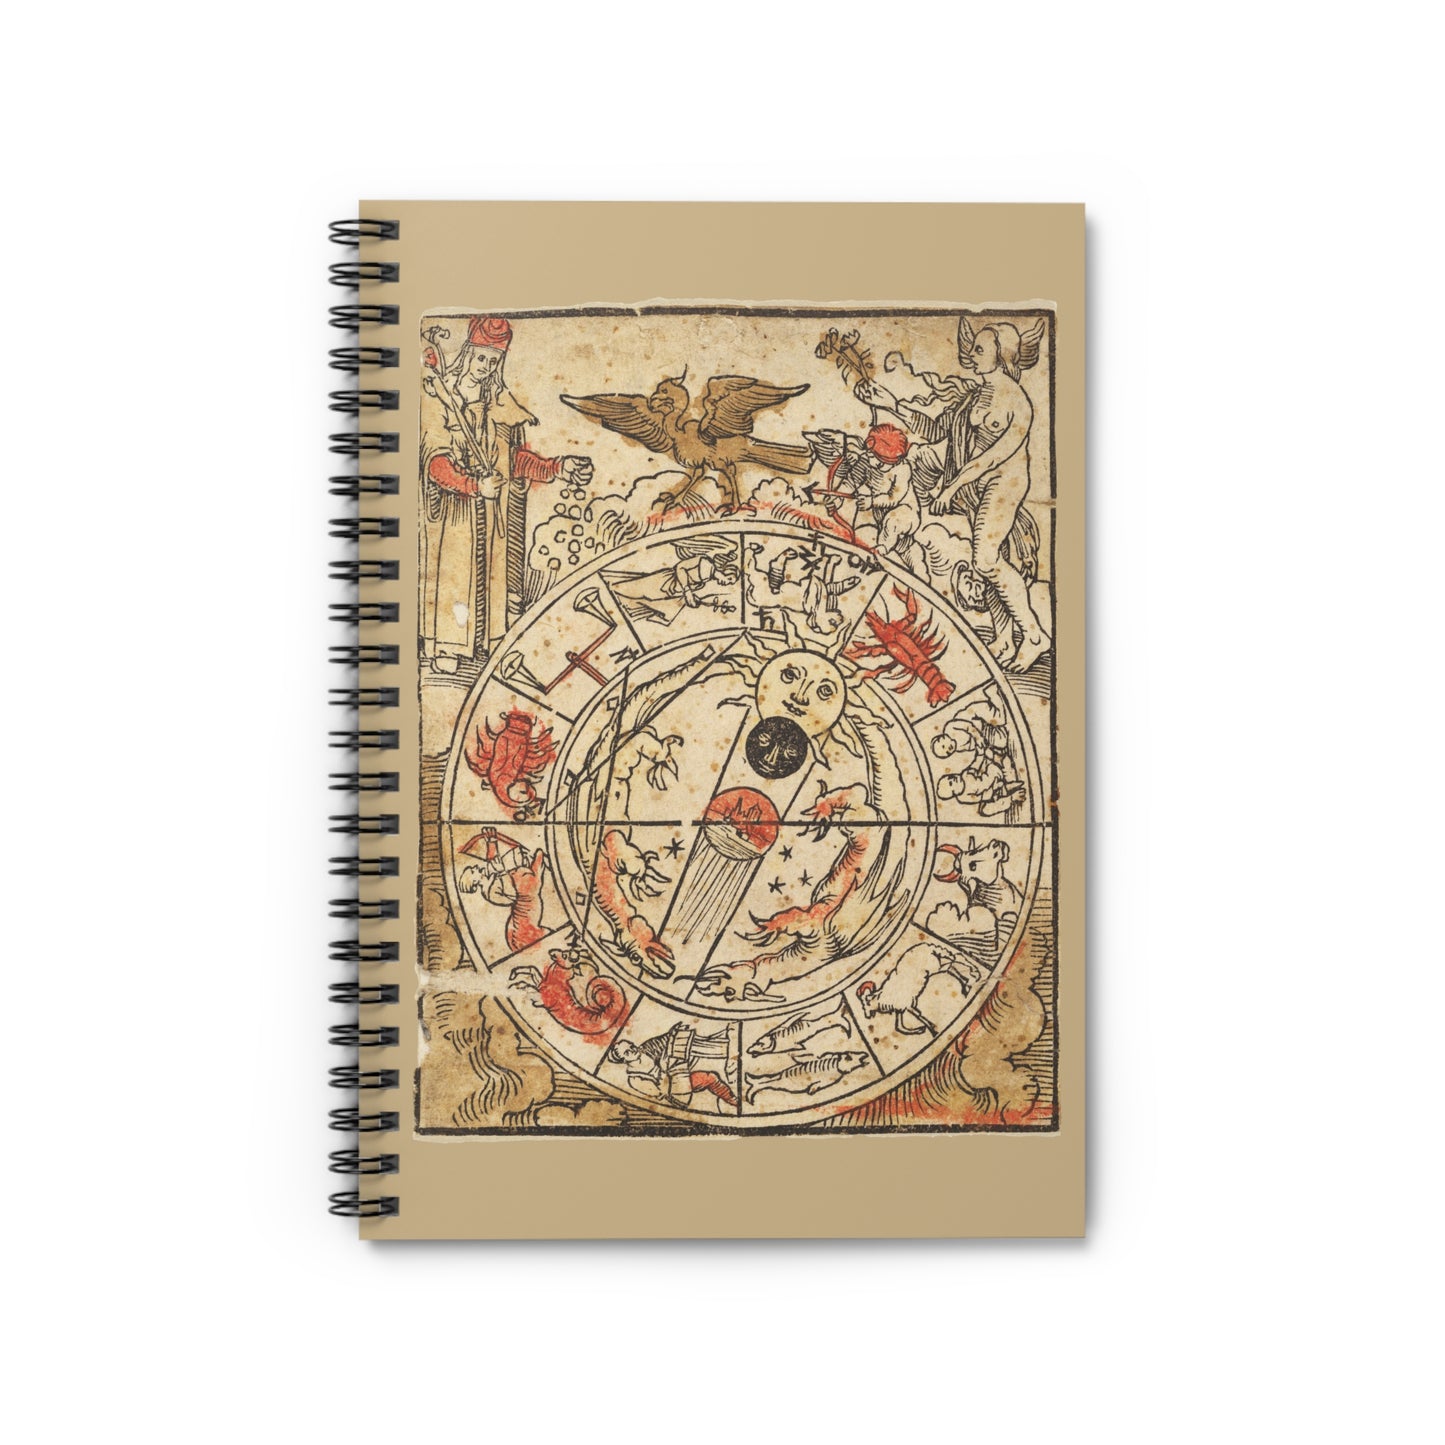 A spiral notebook with a really old manuscript page of the zodiac going around the earth, moon, and sun with figures above.